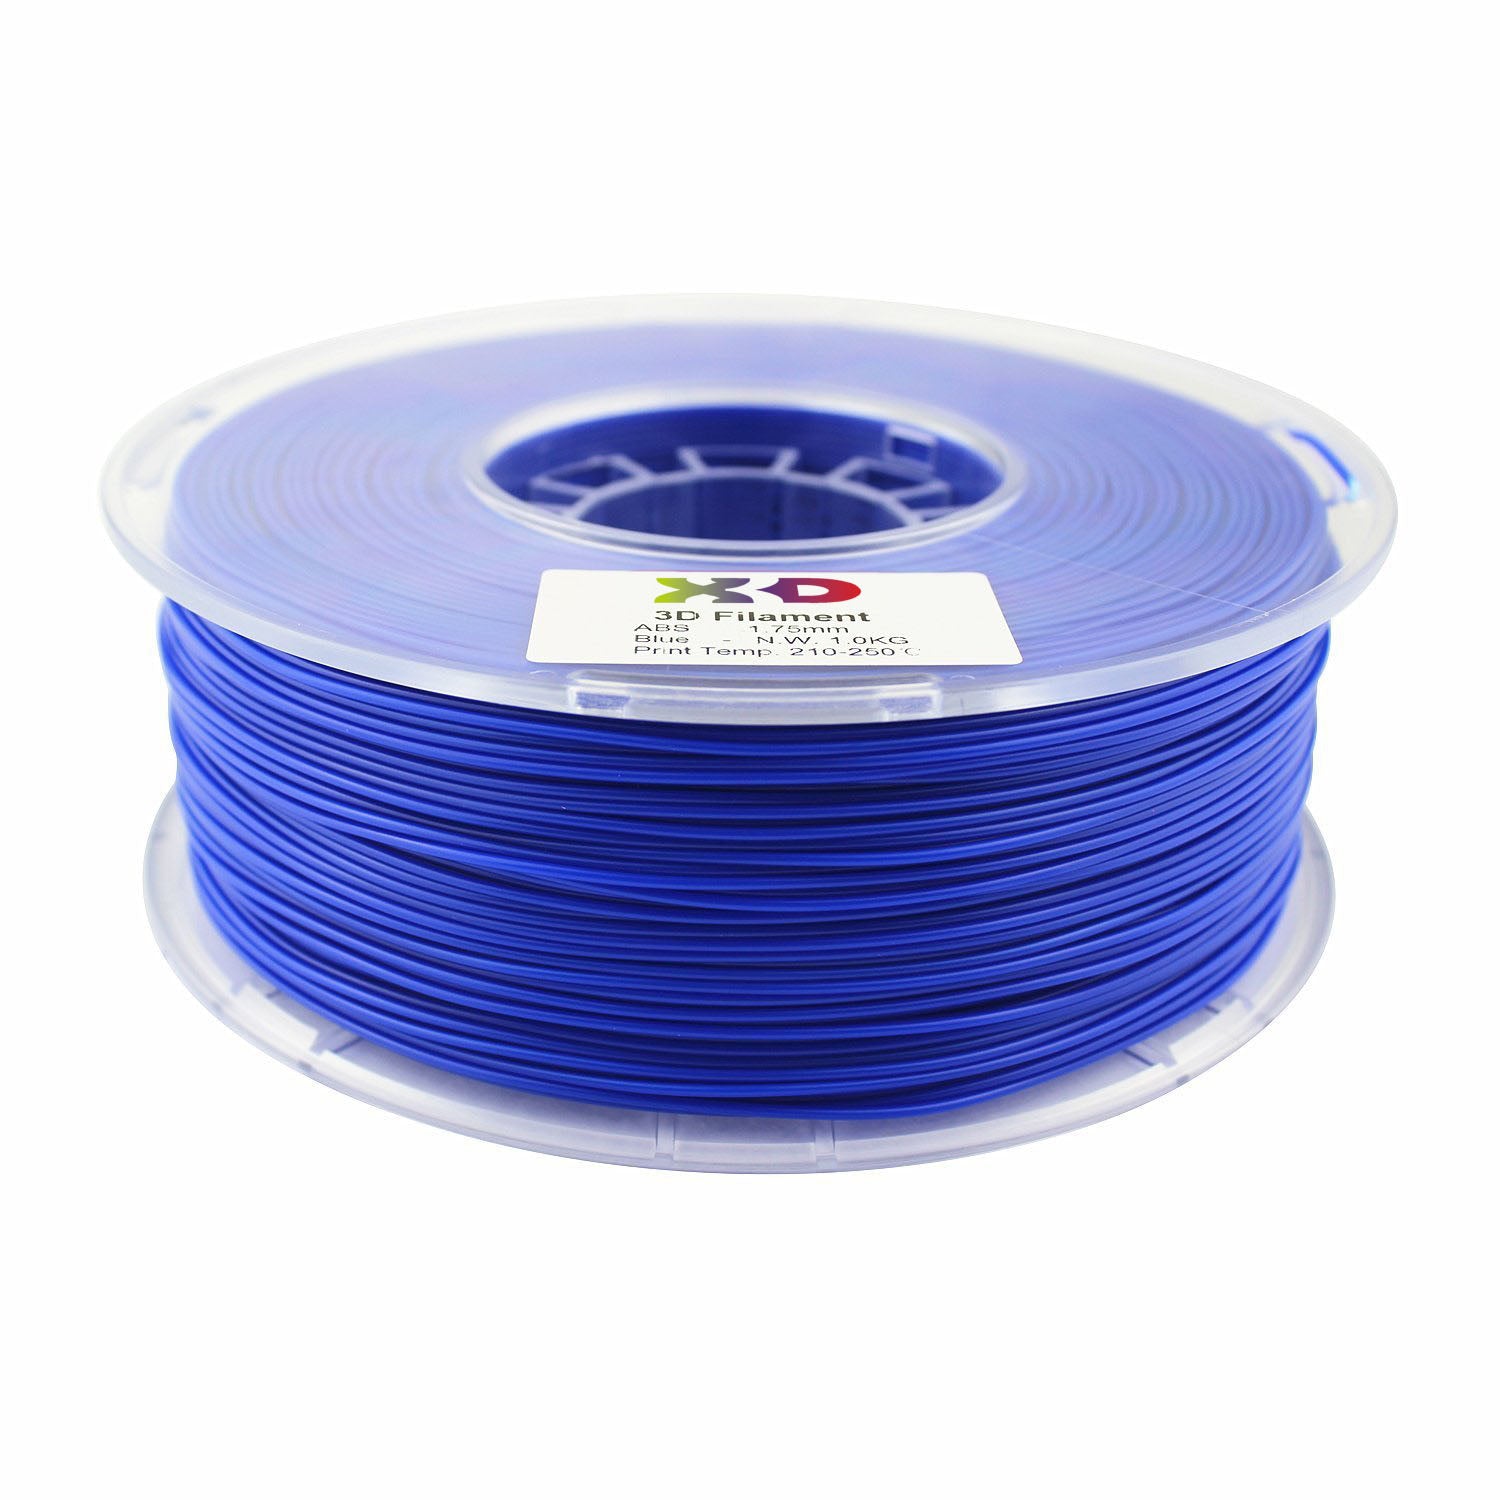 X3D Pro ABS 3.00mm 1kg (from)